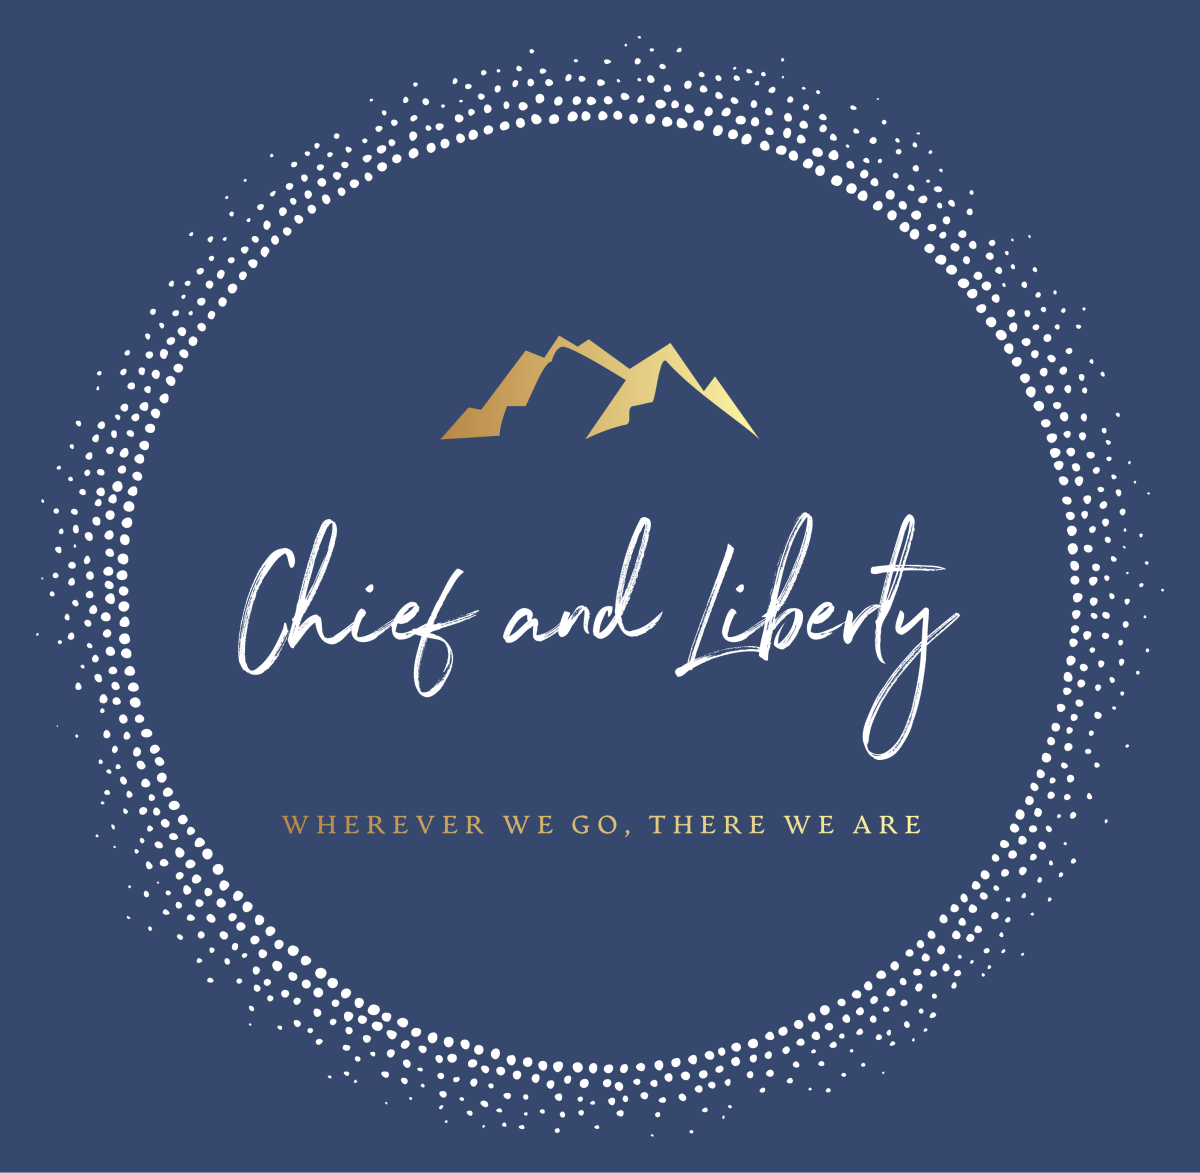 What is Chief and Liberty?